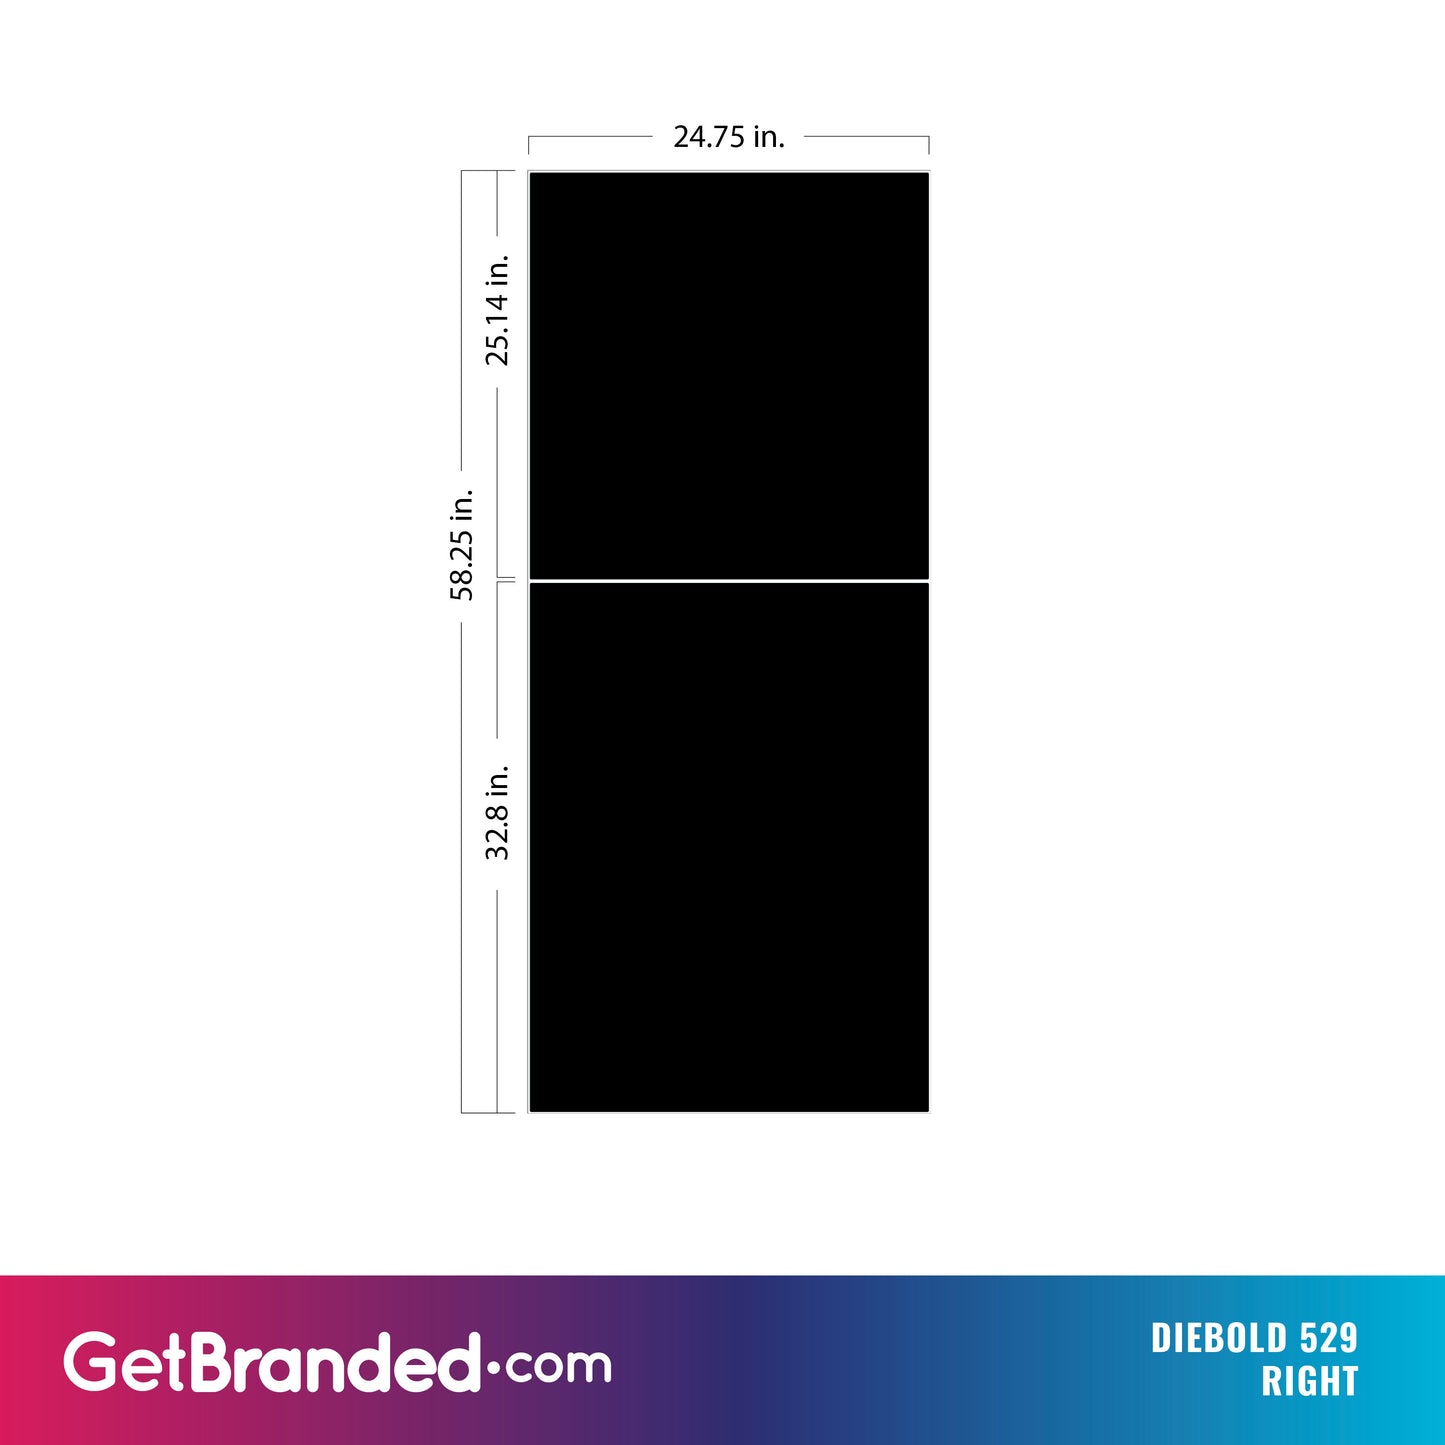 Diebold 529 right panel dimensions